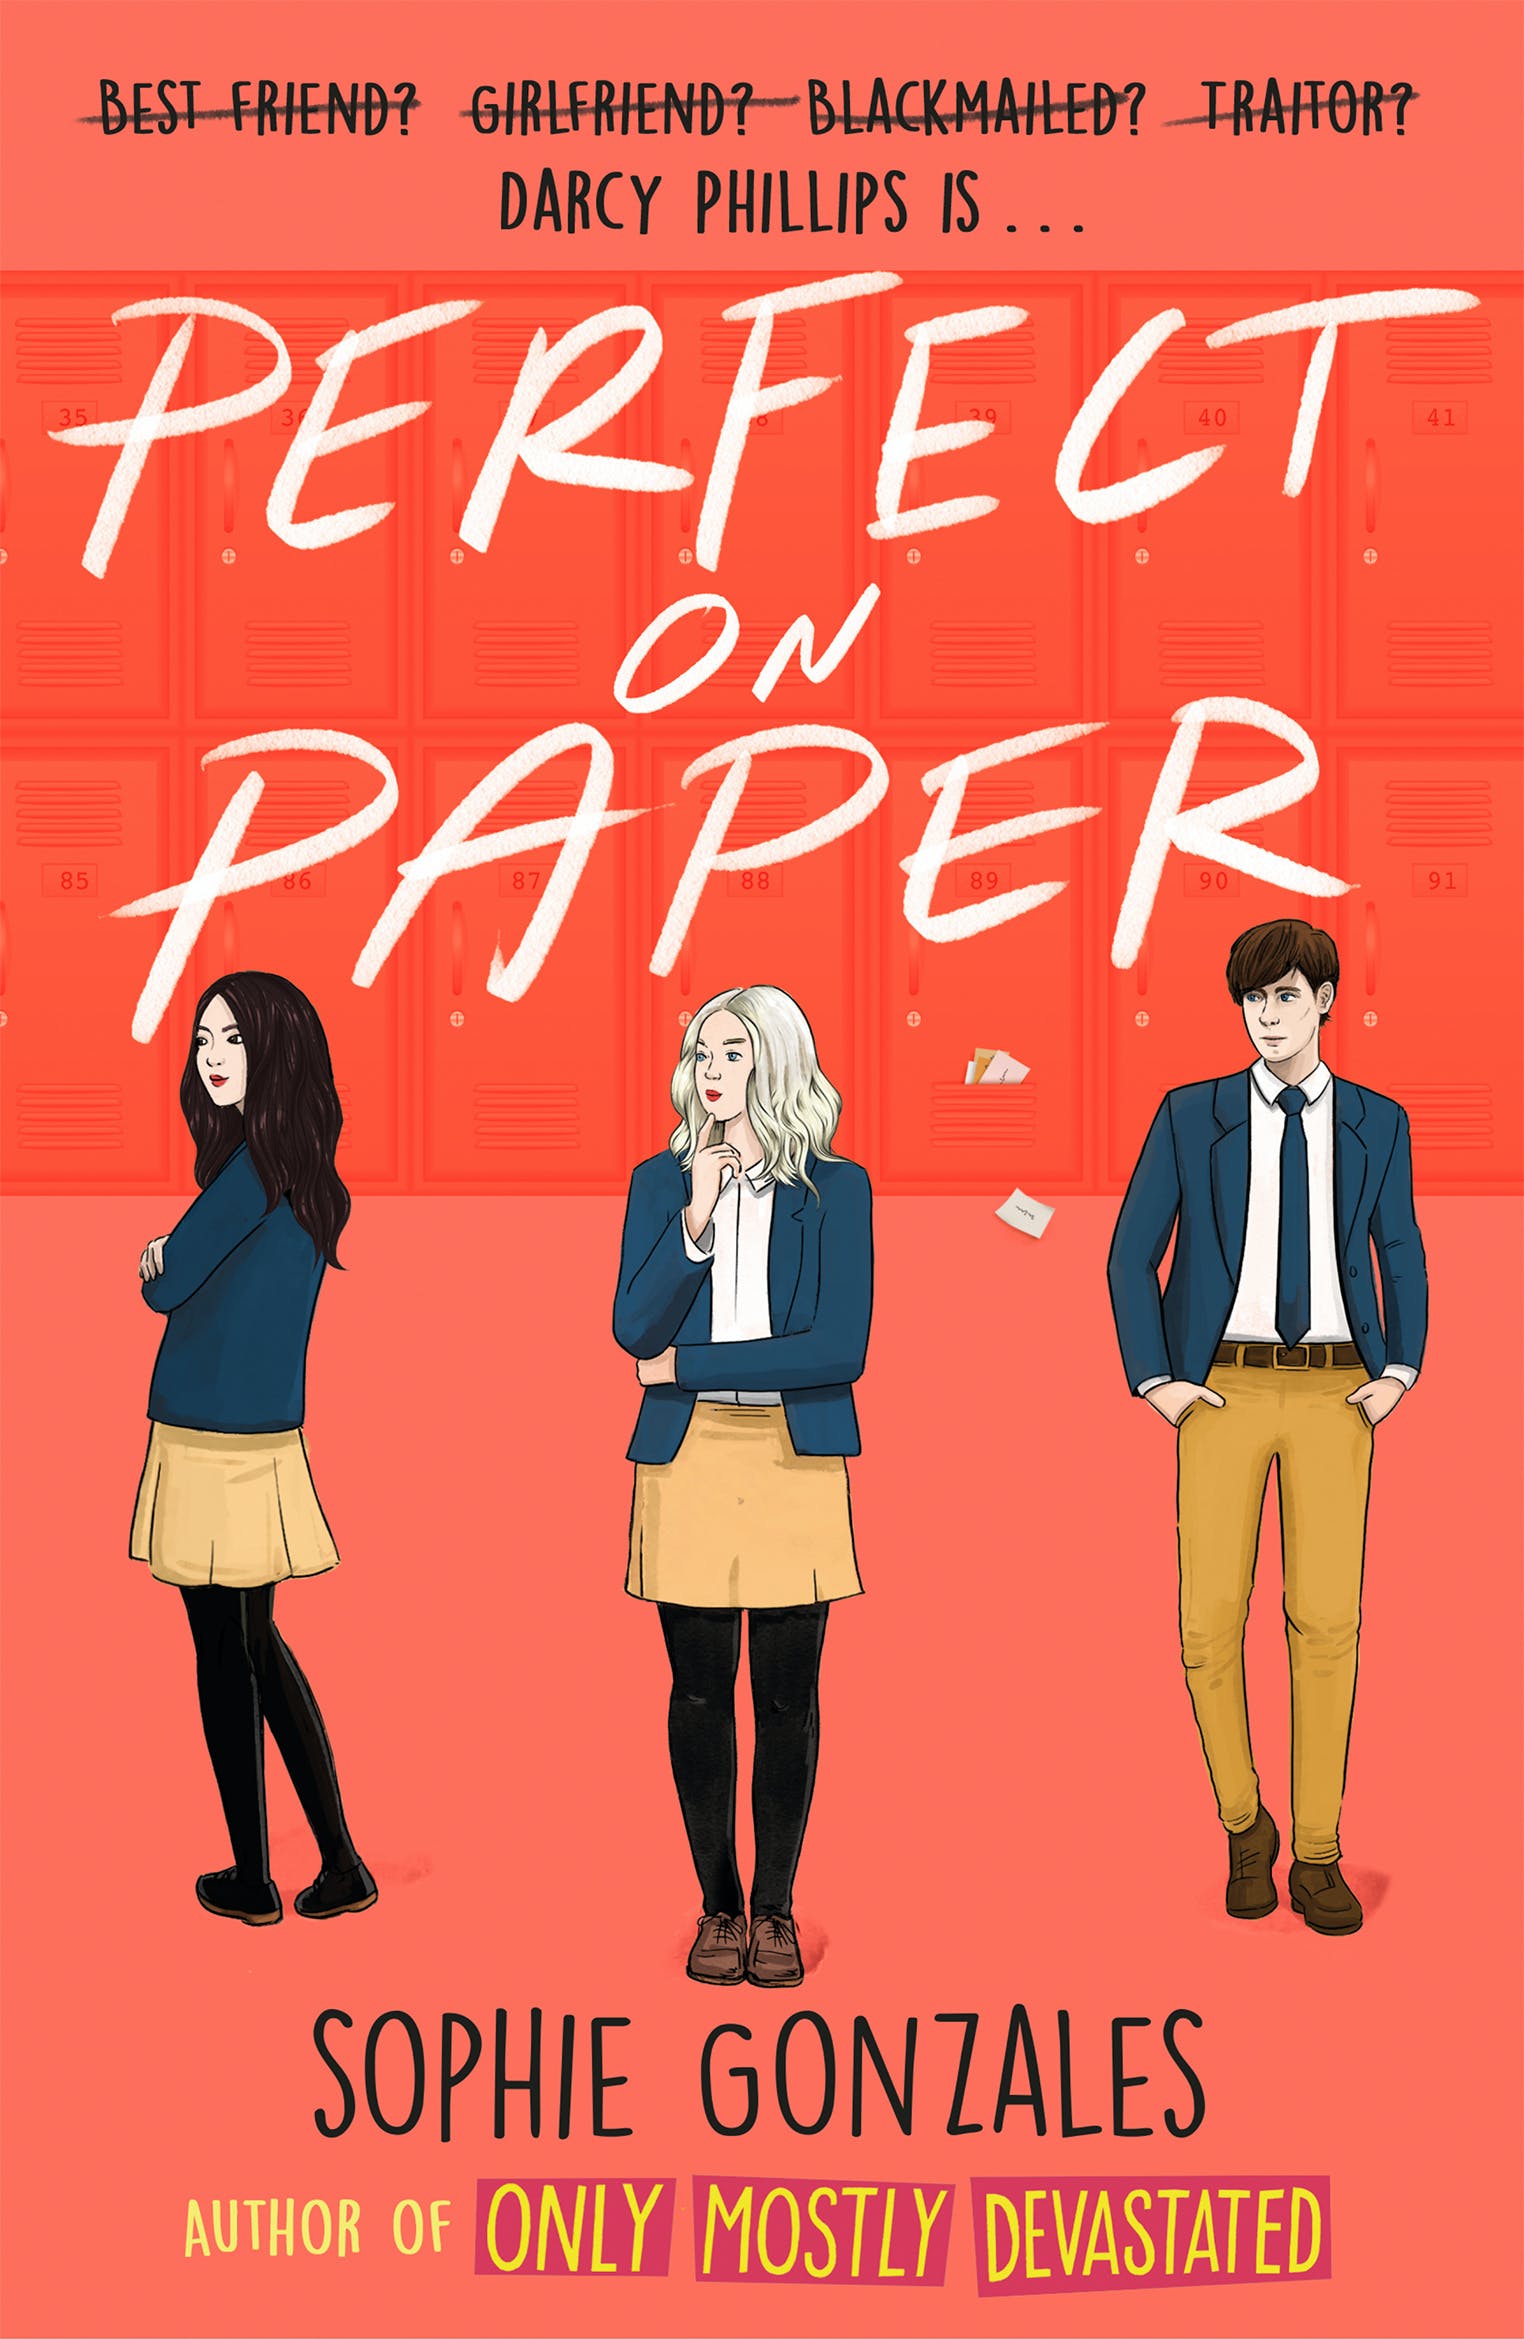 Book cover featuring the three main characters in their school uniform in front of the lockers.